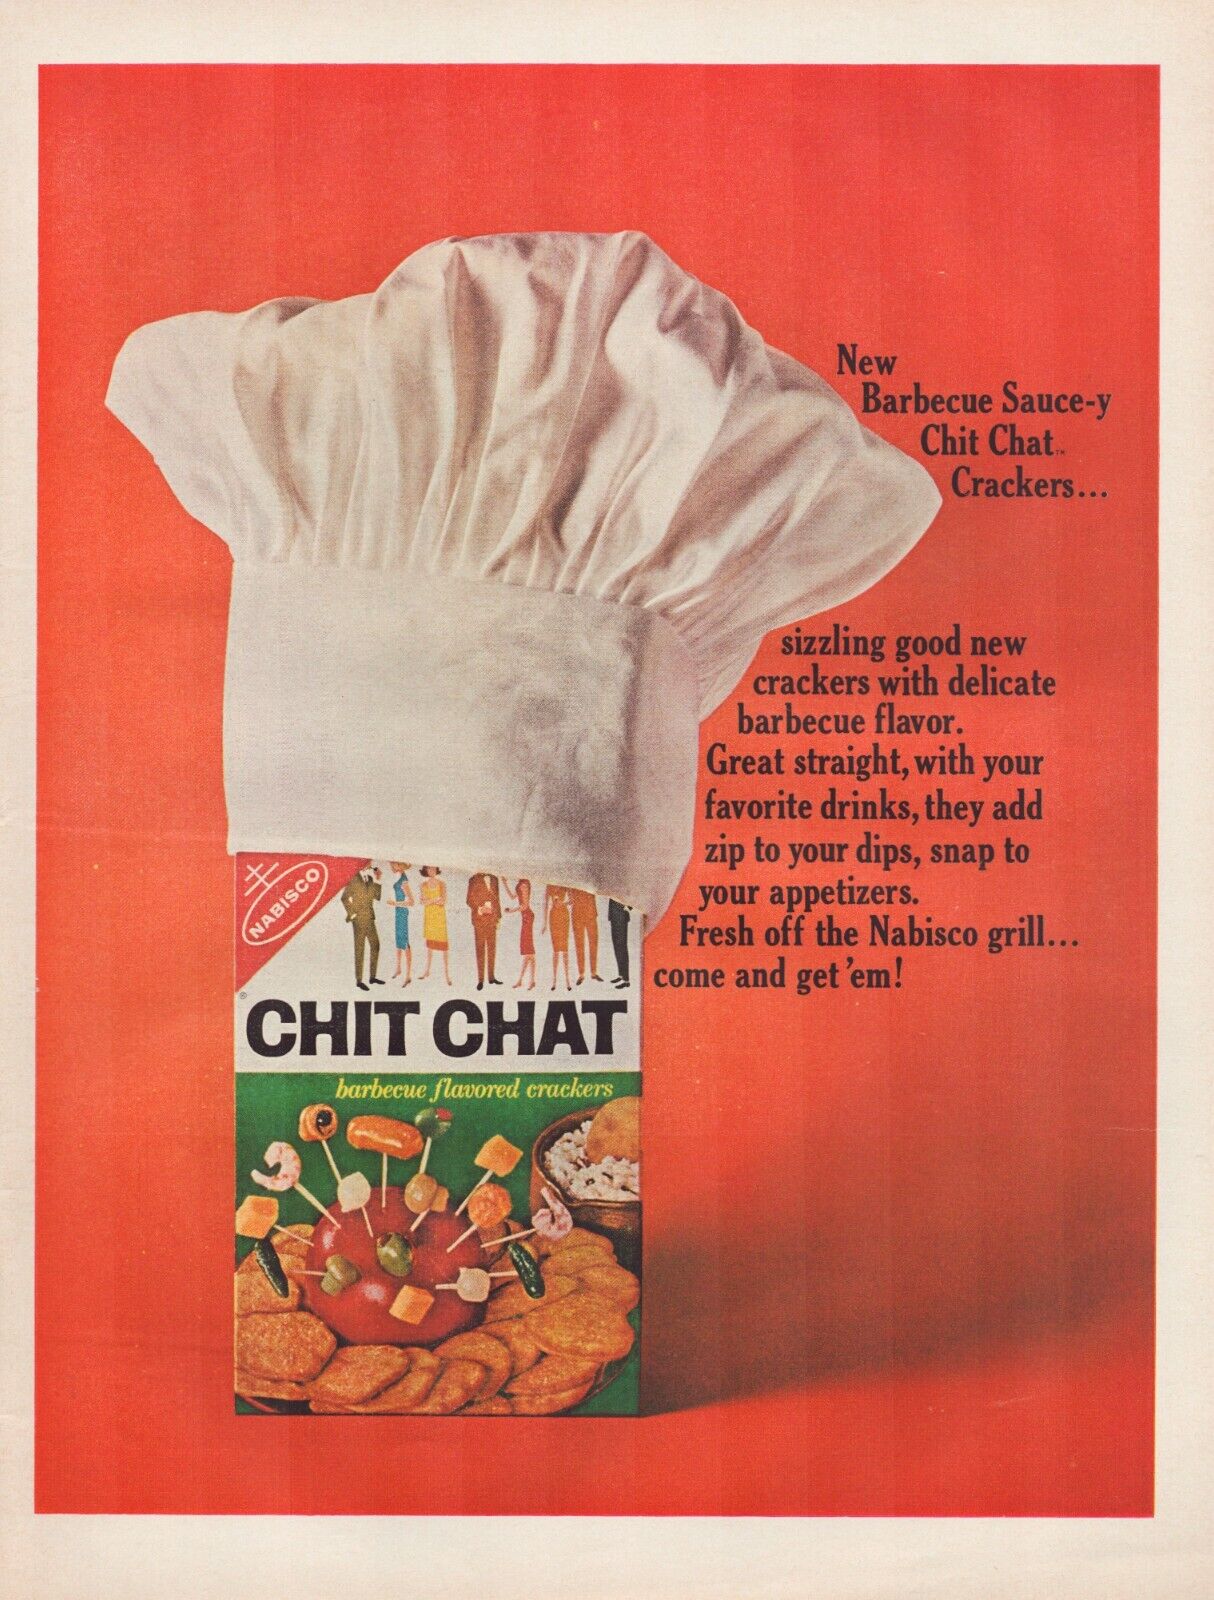 Print Ad Chit Chat BBQ Crackers Nabisco 1964 Full Page Magazine 10.5\